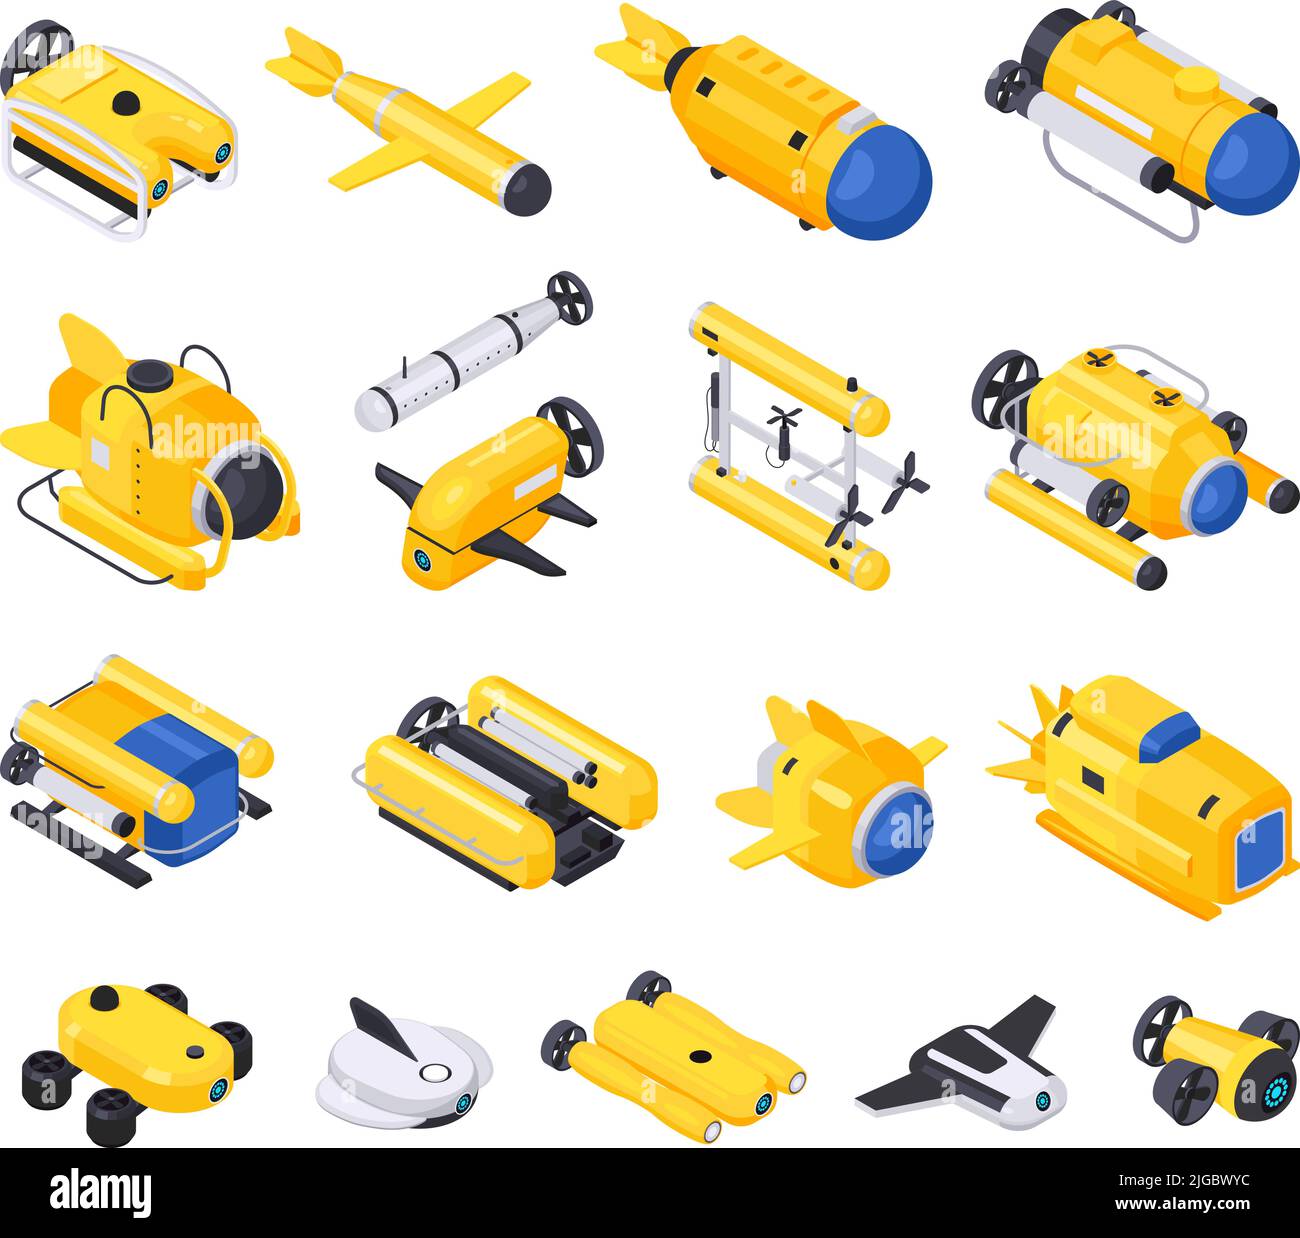 Underwater vehicles machines equipment isometric icon set with machines for diving for scuba diving and exploring the seabed vector illustration Stock Vector